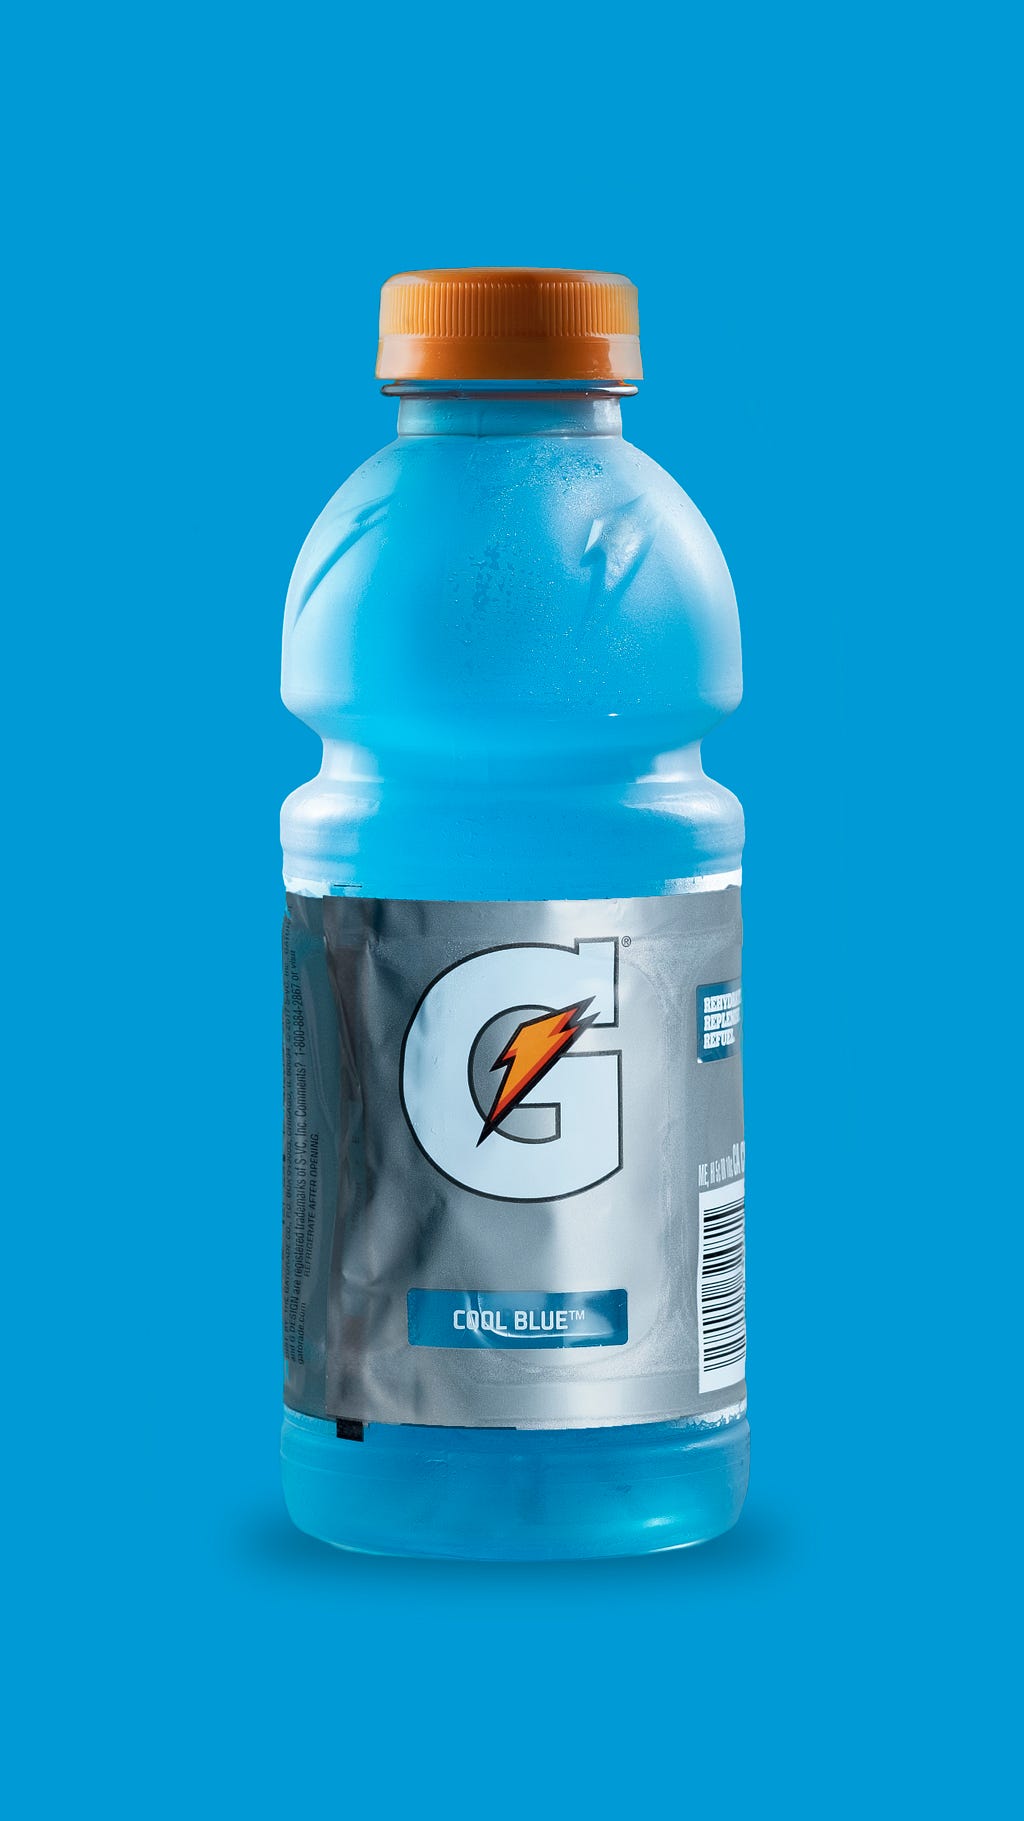 A Gatorade bottle isolated on a blue background